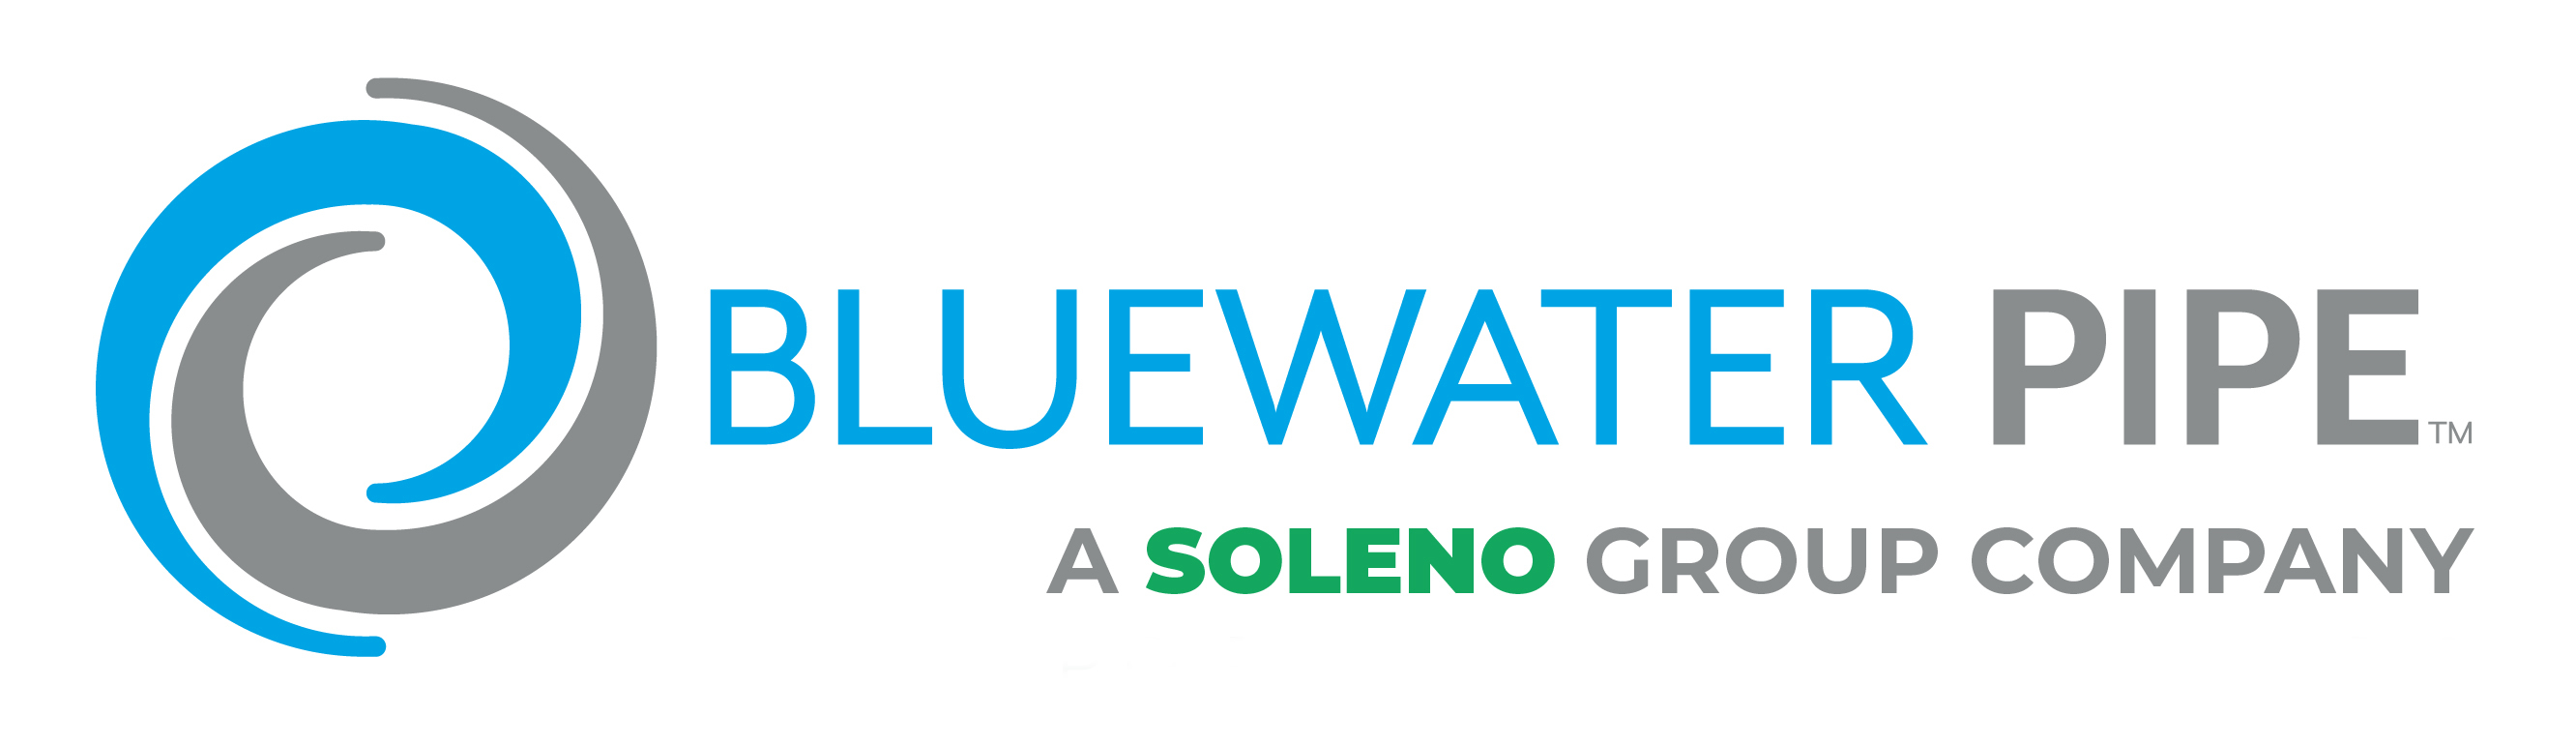 Bluewater Pipe Logo